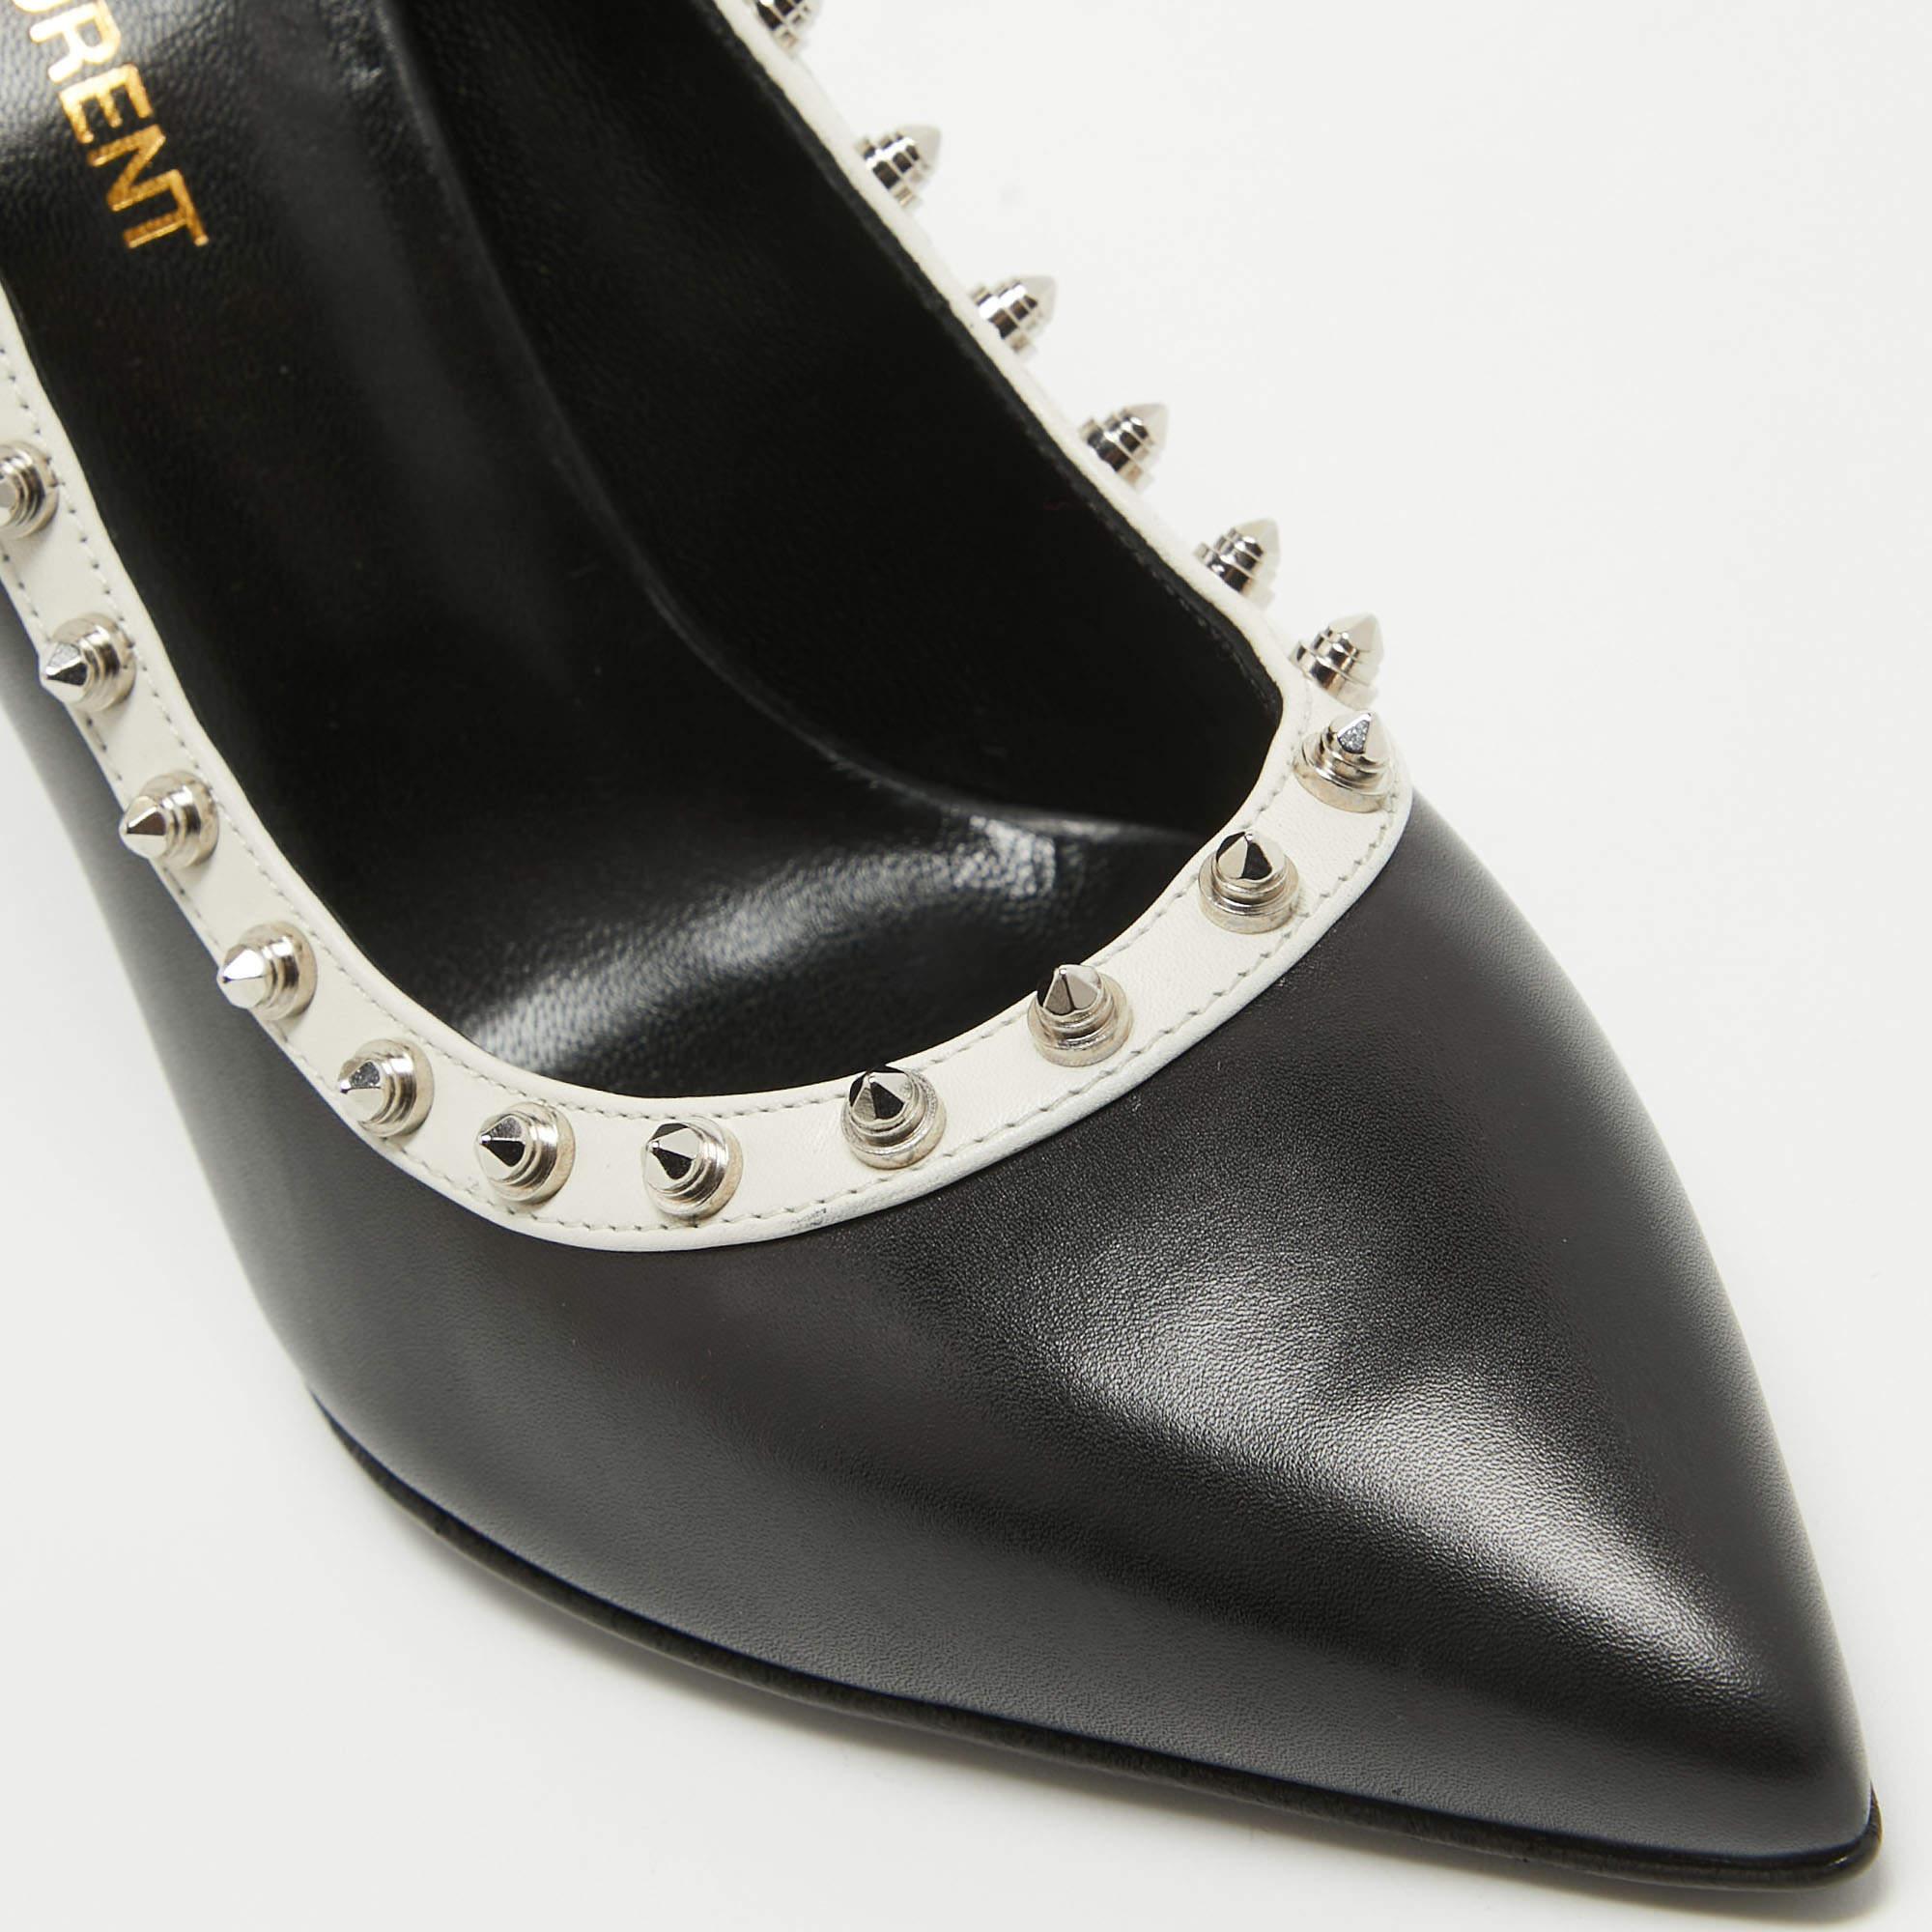 Saint Laurent Black/White Leather Studded Pointed Toe Pumps Size 36 For Sale 2